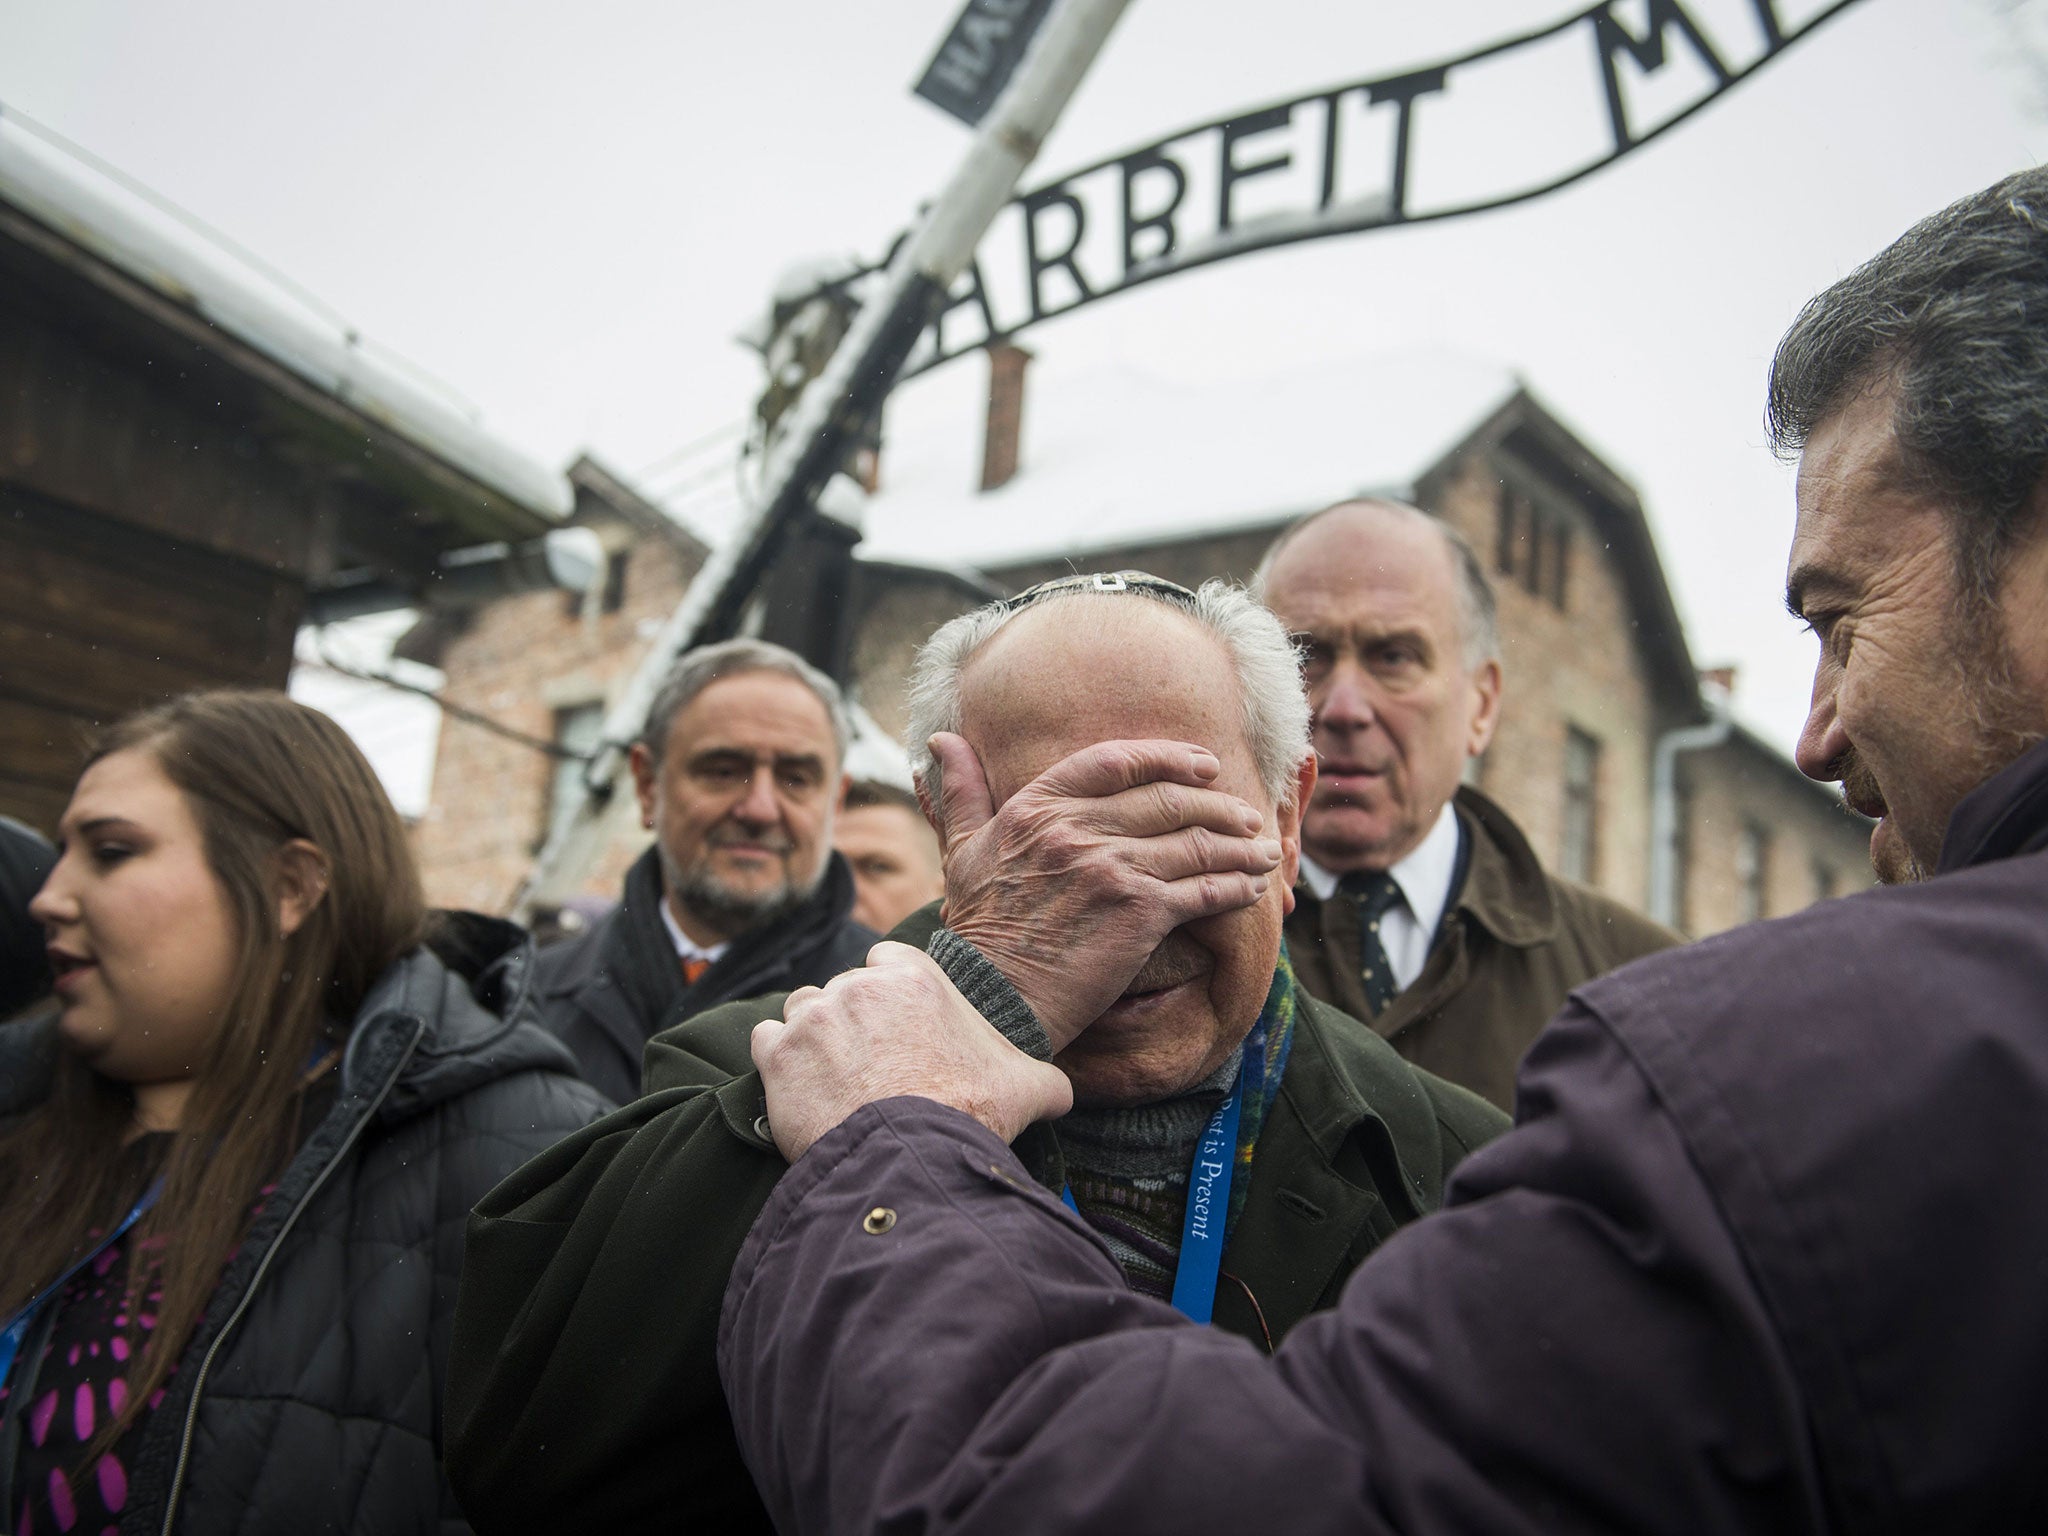 Holocaust survivor Mordechai Ronen (C) from the US is comforted by his son as he is overcome by emotion standing next to President of the World Jewish Congress Ronald Lauder (2nd R) as he arrives at the former Auschwitz concentration camp in Oswiecim on 26 January 2015